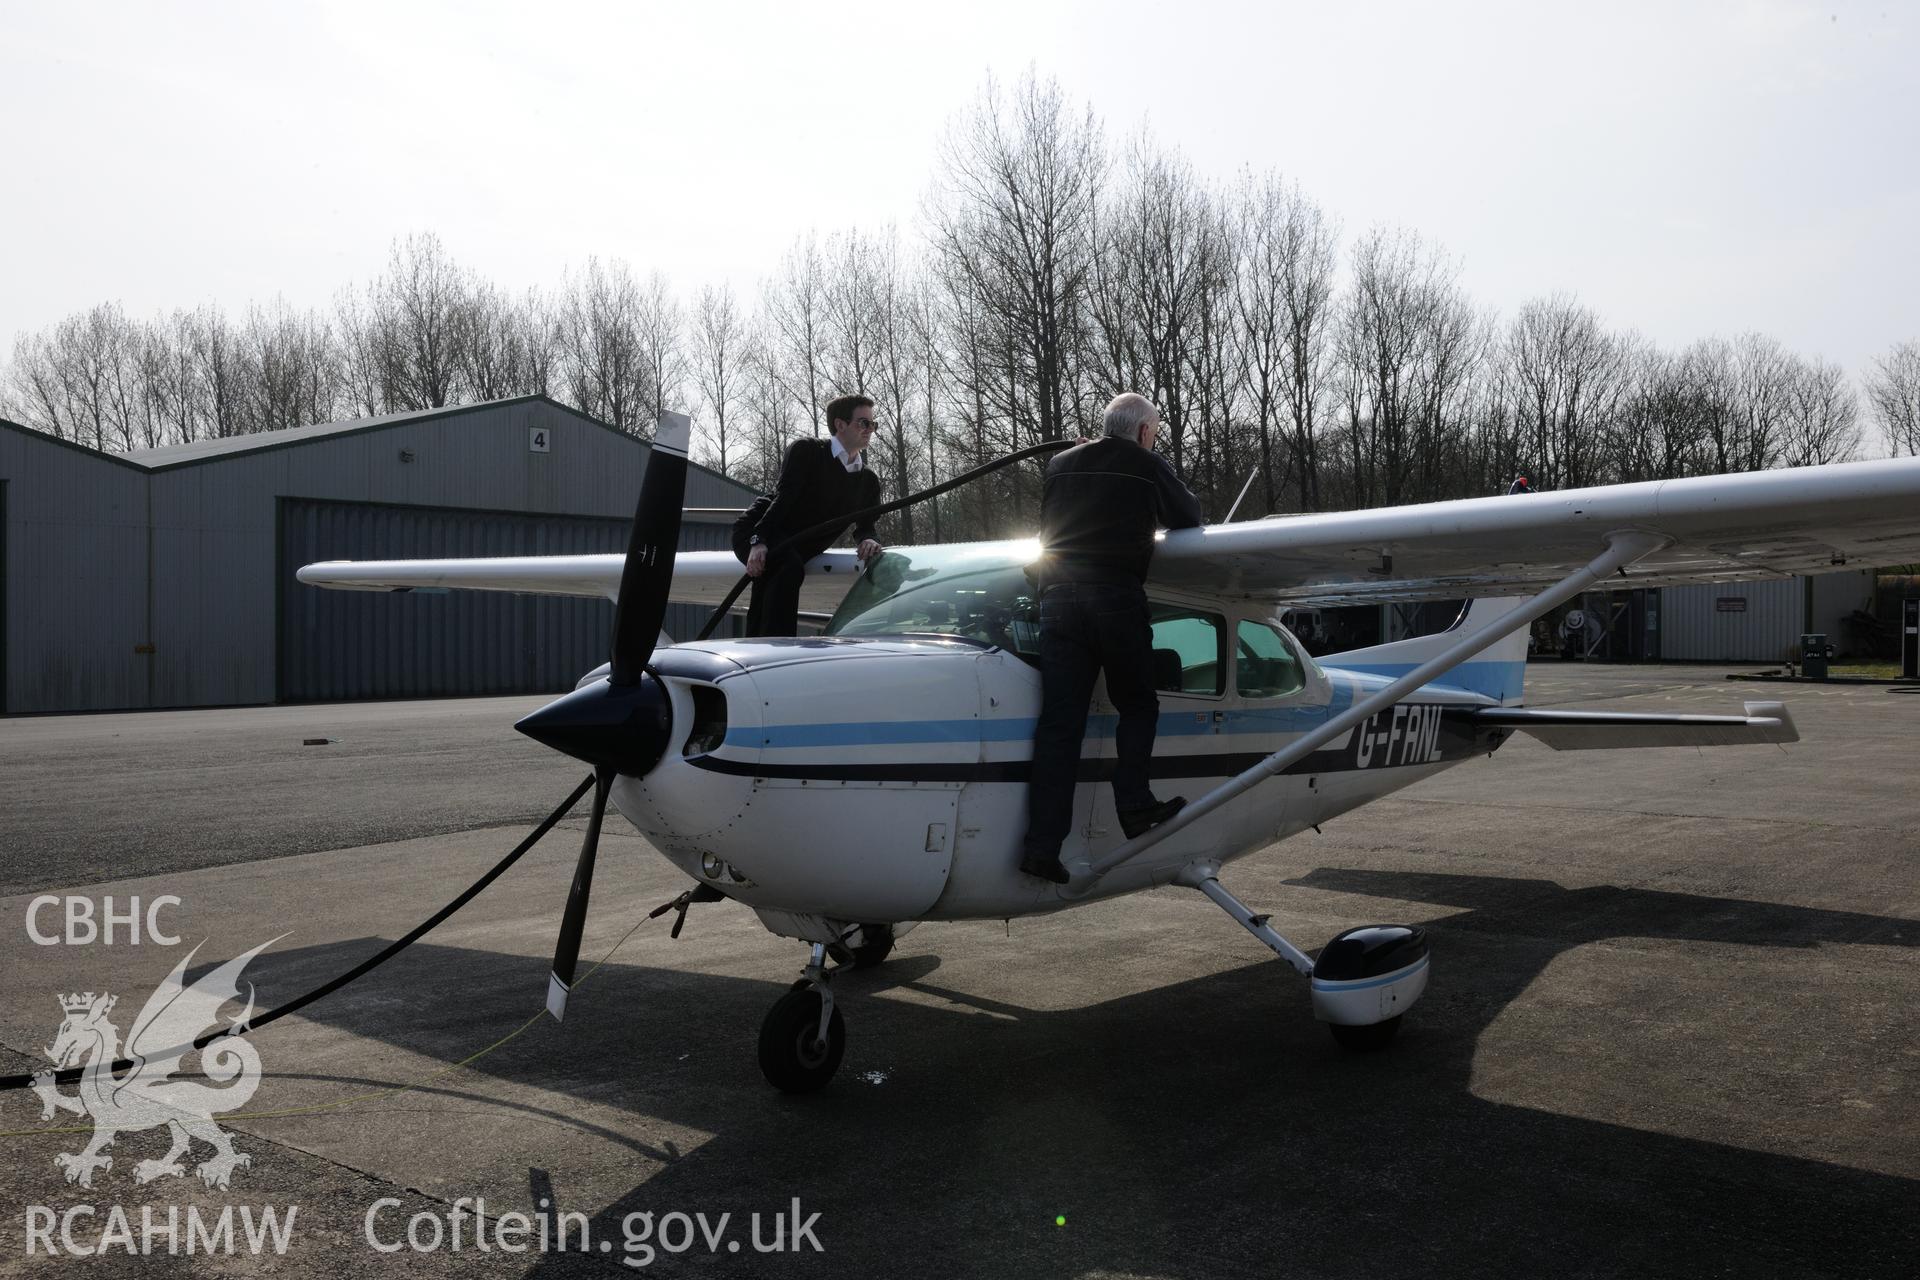 Fuelling a Cessna 172 prior to Royal Commission aerial photography on 27th March 2017